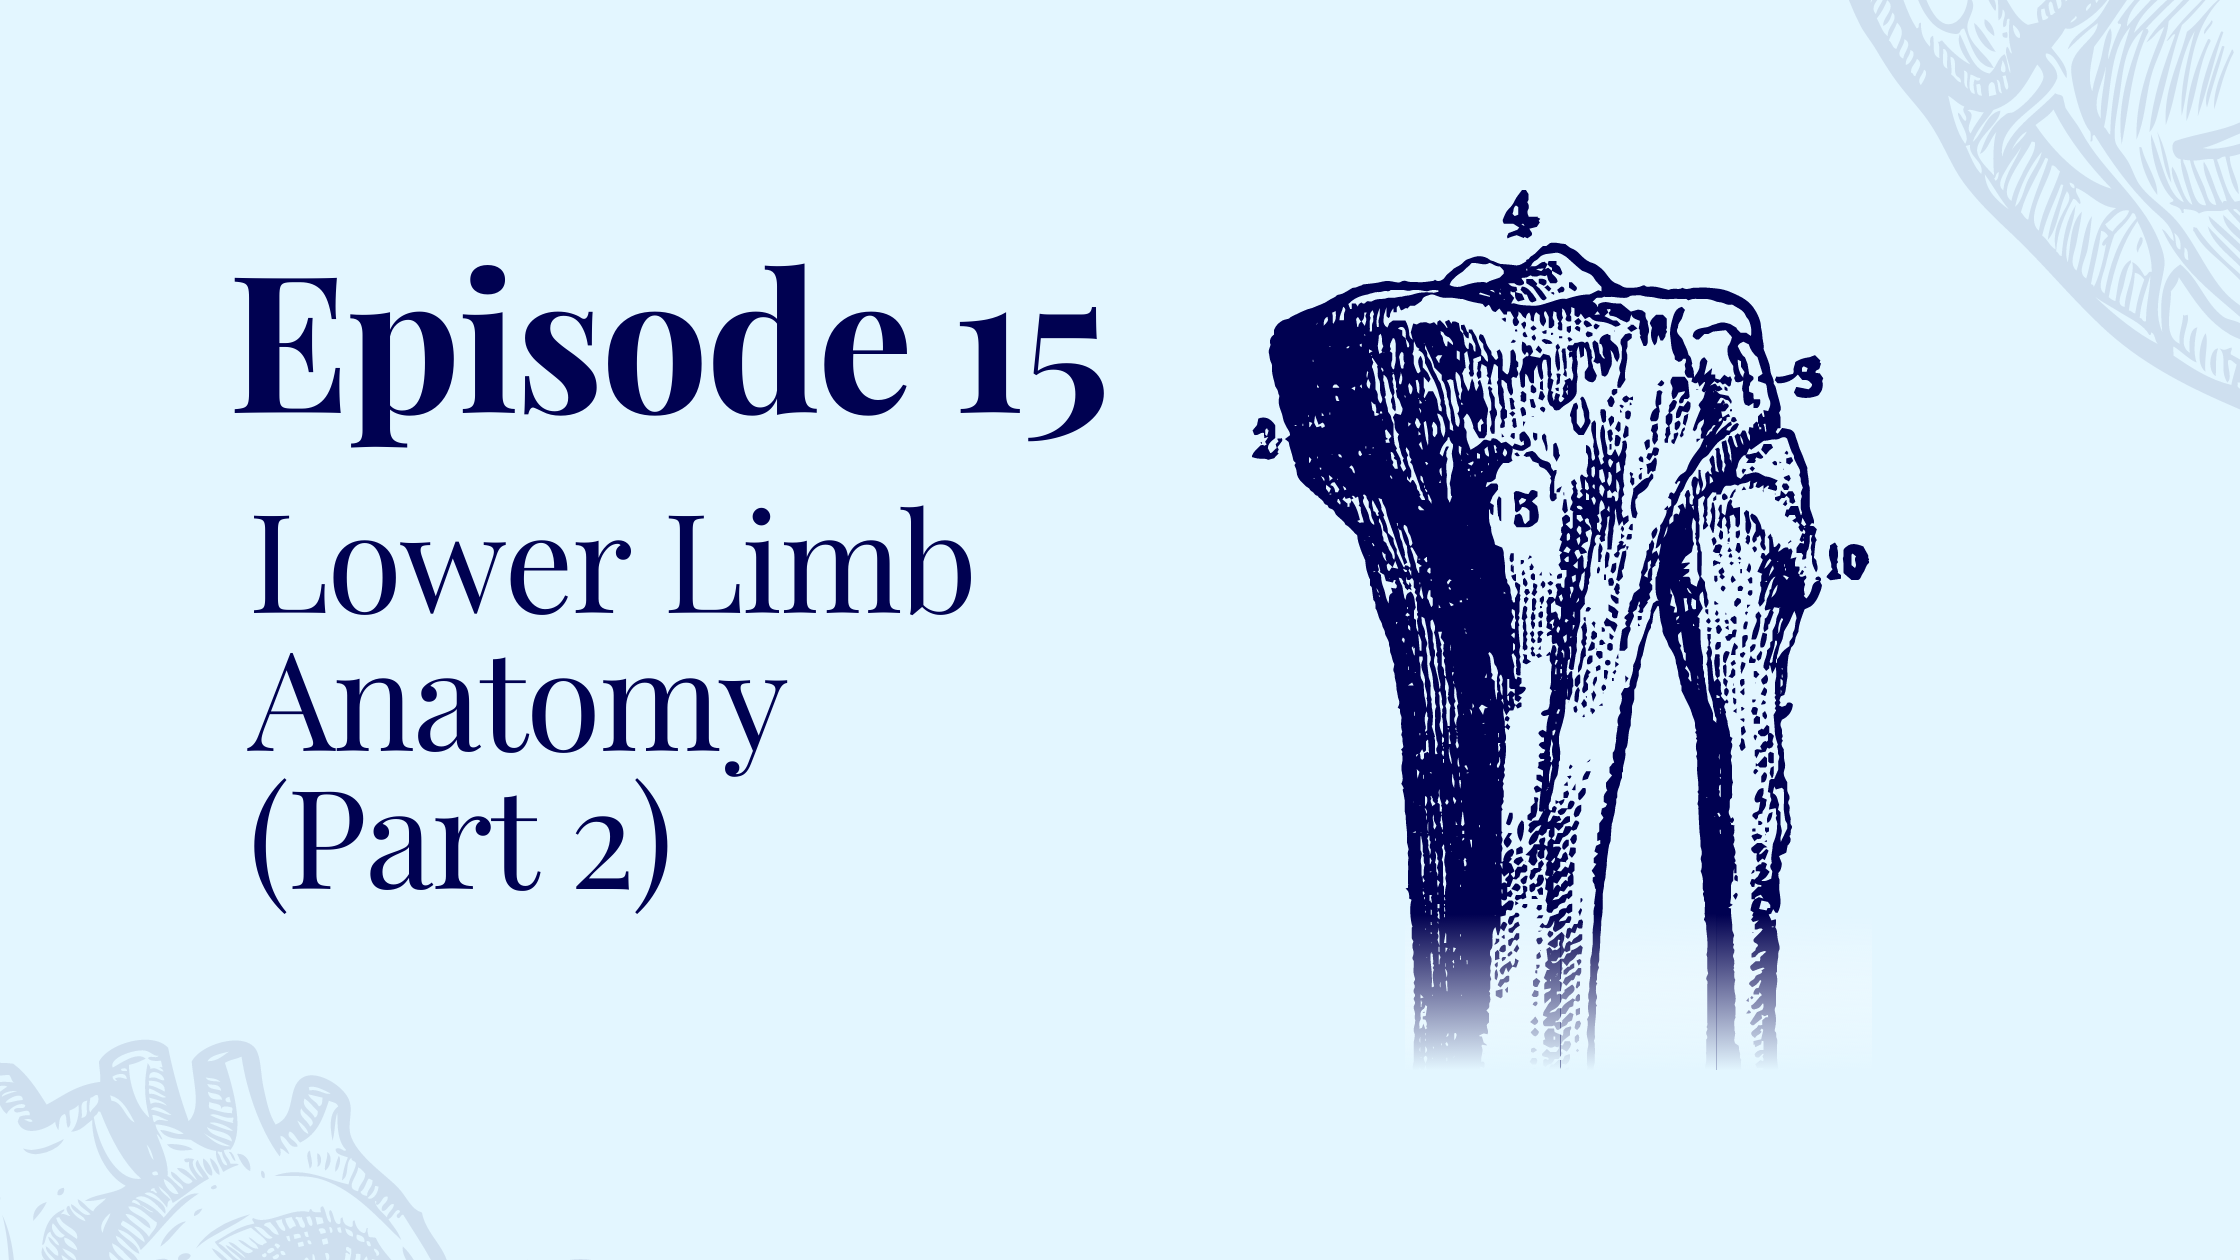 Episode 15 – Lower Limb Anatomy (Part 2) with Dr. Anna Morgan